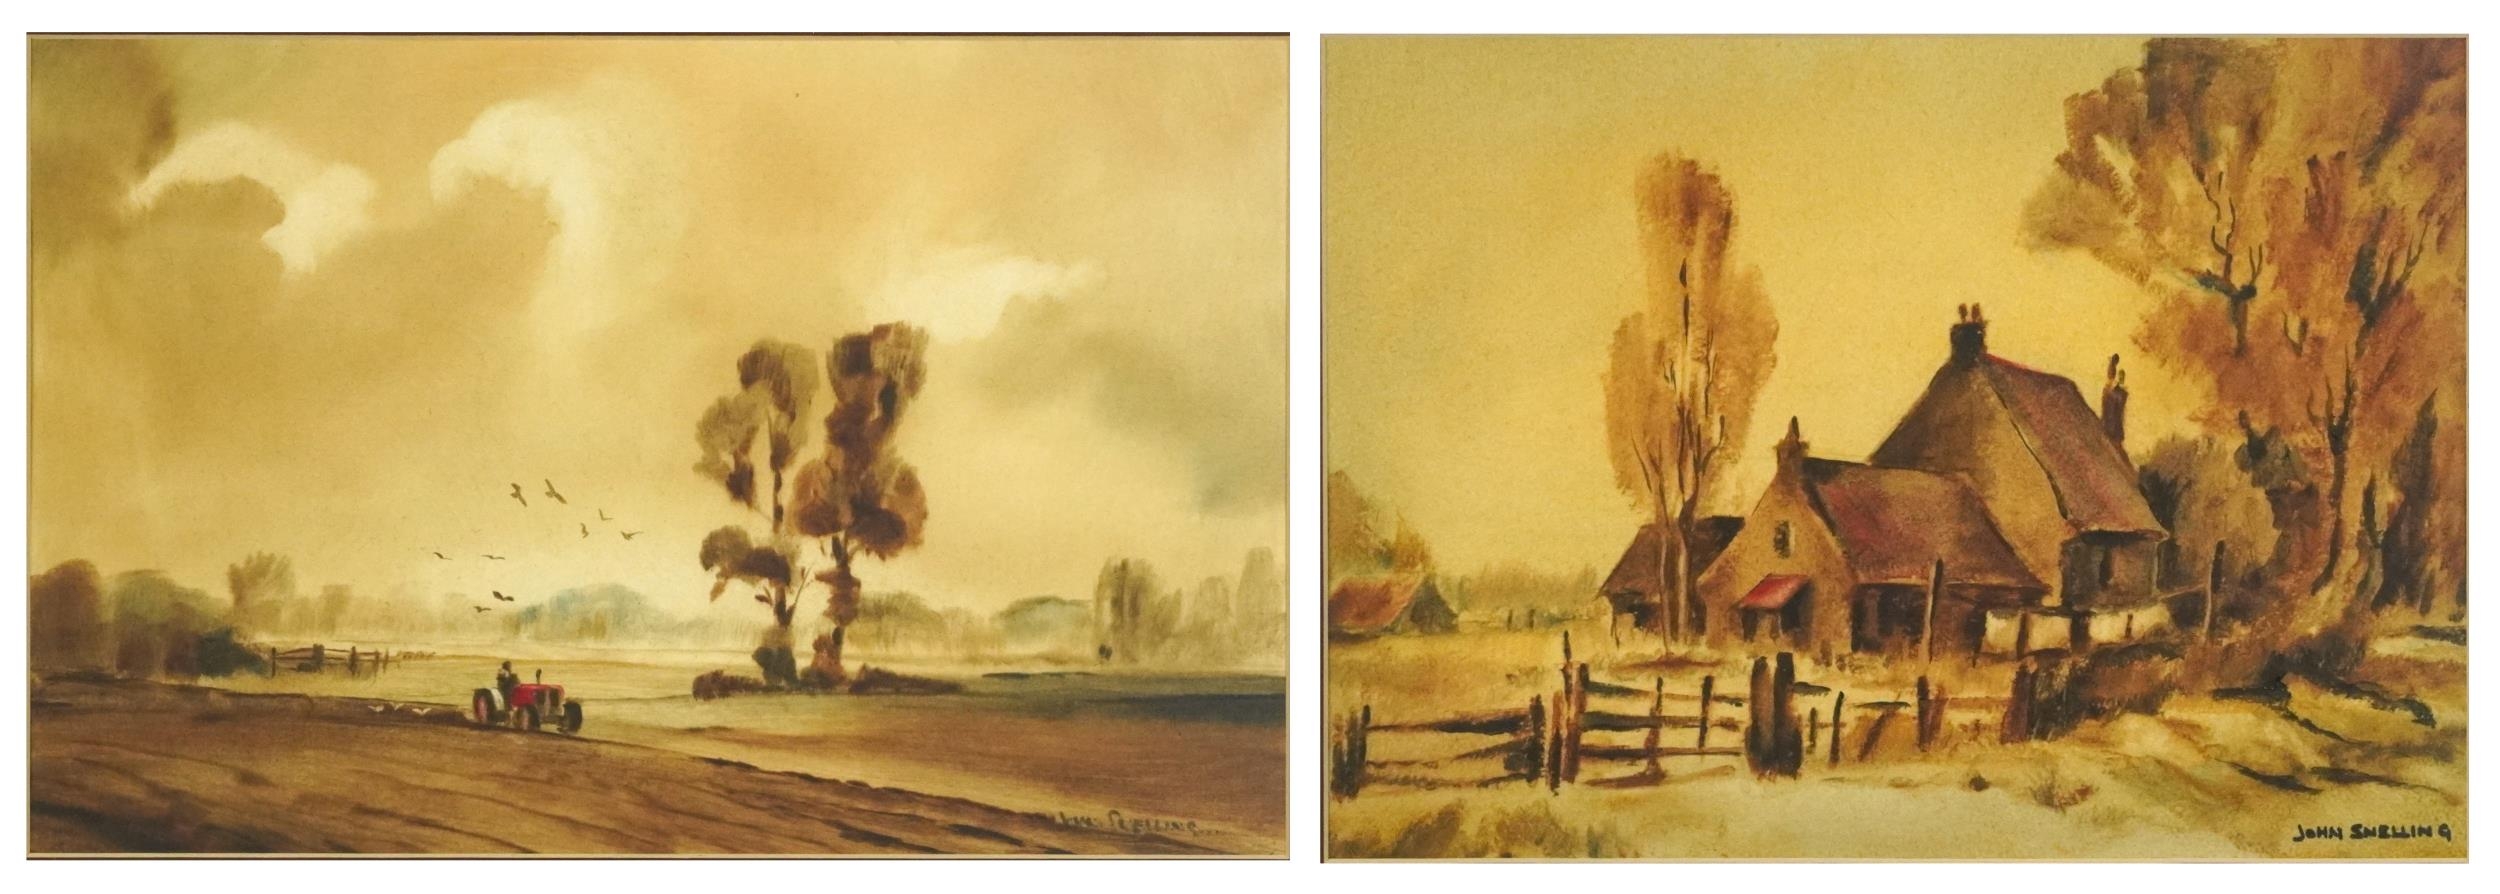 John Snelling - Farmland and farm buildings and Stockman's cottage and evening ploughing, two